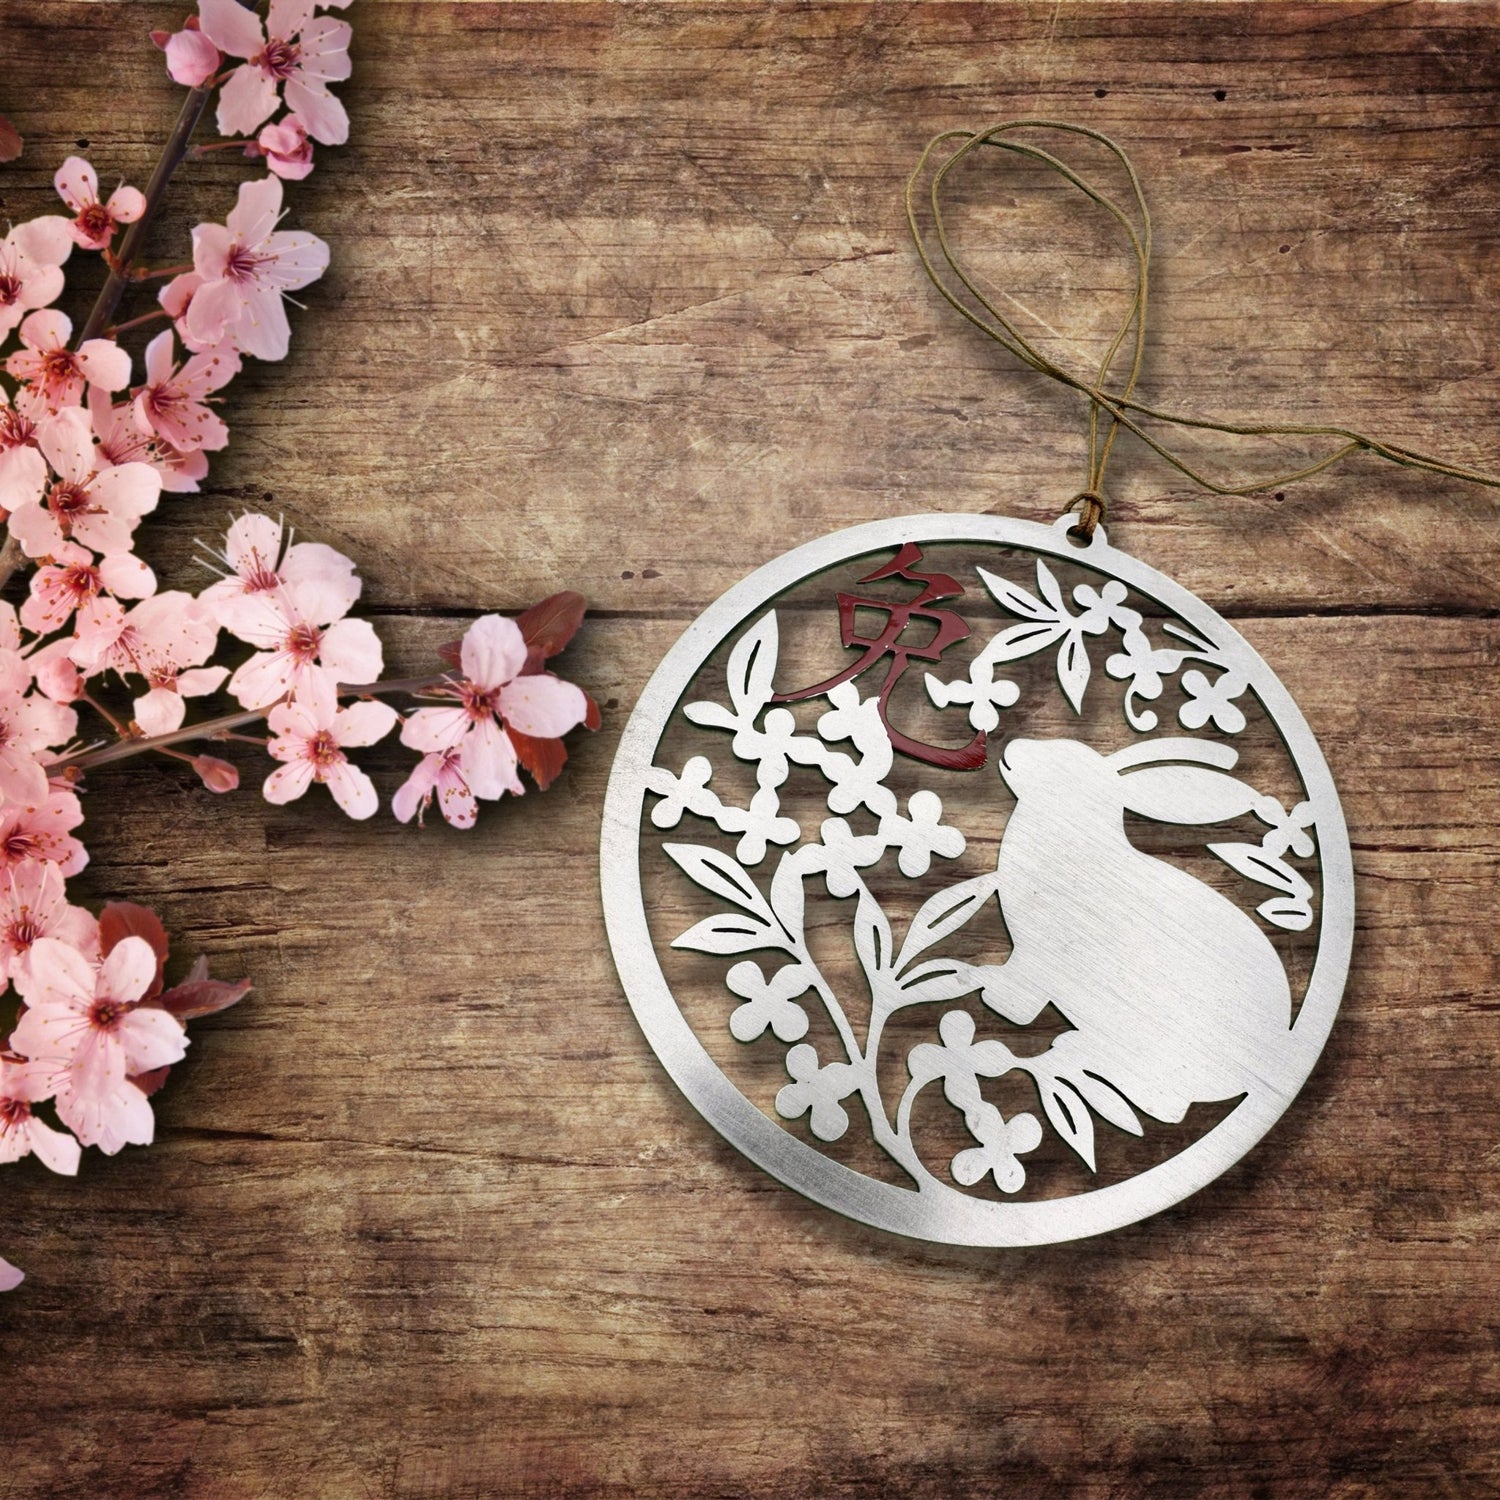 CHINESE ZODIAC COLLECTION - Authenticaa
Intricate zodiac ornaments to celebrate the Lunar year or a birthday